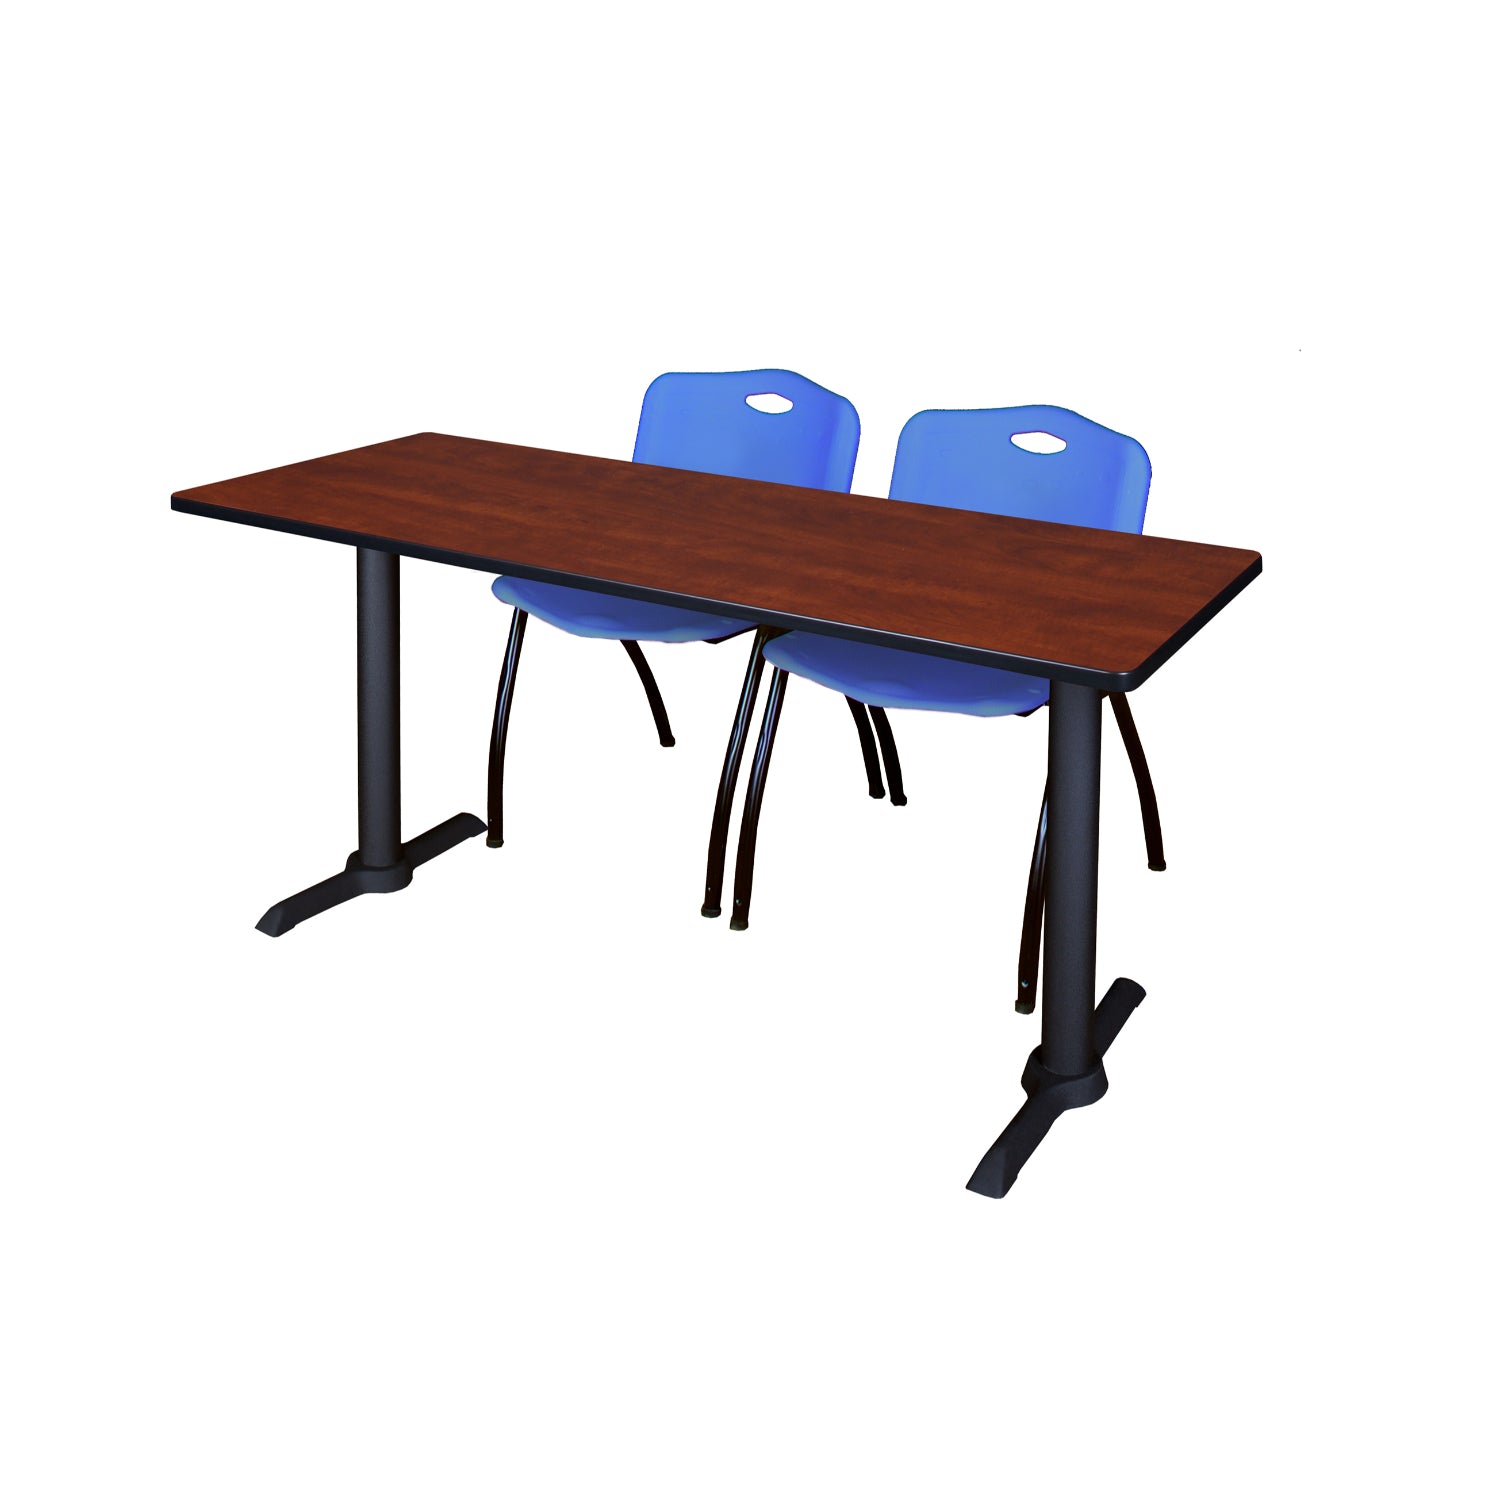 Cain Training Table and Chair Package, Cain 60" x 24" T-Base Training/Seminar Table with 2 "M" Stack Chairs